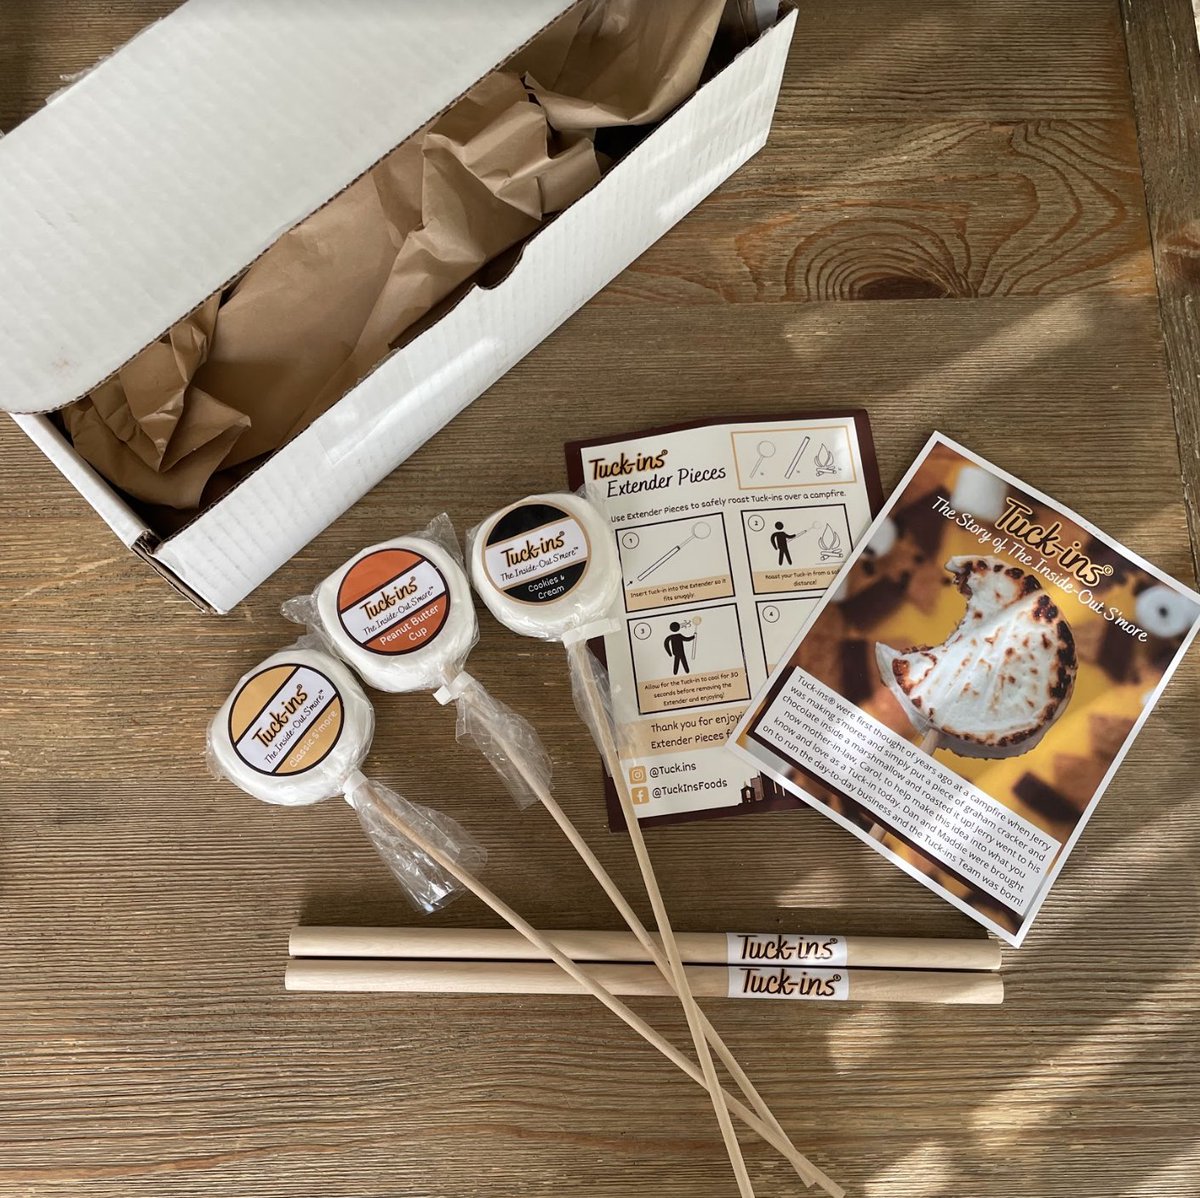 POV: unboxing your Tuck-ins👀🎁😆🍫🔥

#smores #tuckins #smallbusiness #unboxing #unbox #unboxwithme #giftideas #smallbusinessowner #smallbiz #smallbizphilly #dessert #desserts #easydessert #camping #campfire #family #familyfun #kidfriendly #momhacks #hack #foodie